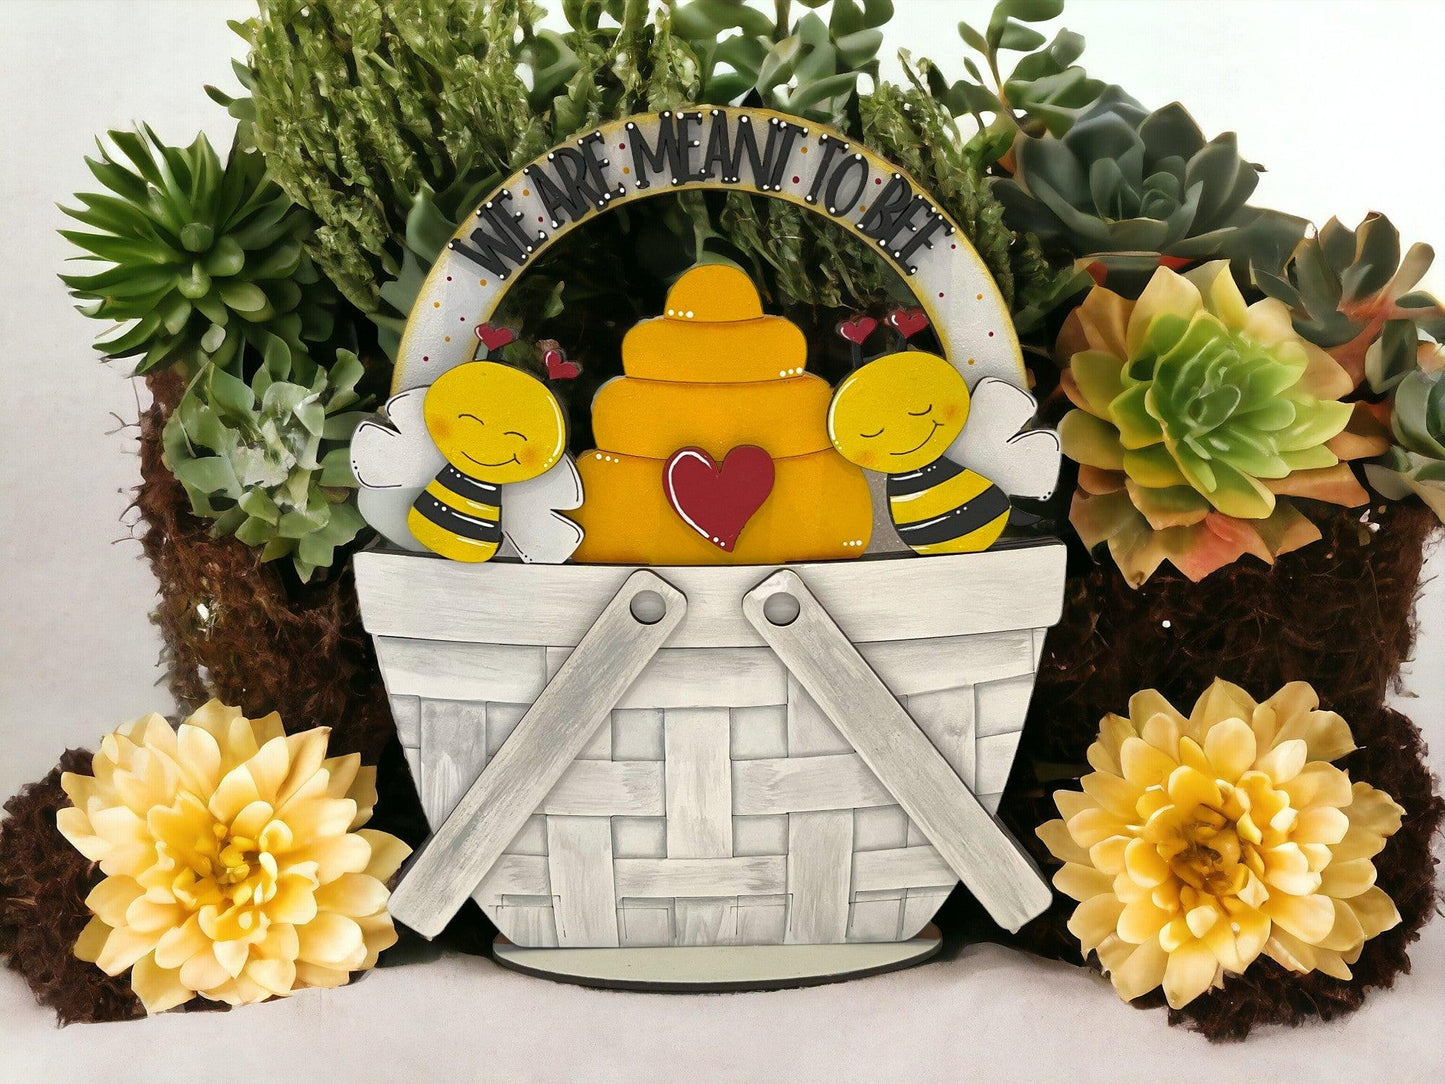 Bee Valentine For The Flower Basket Decor - Wood Blank for Painting - Inserts for Basket - RusticFarmhouseDecor